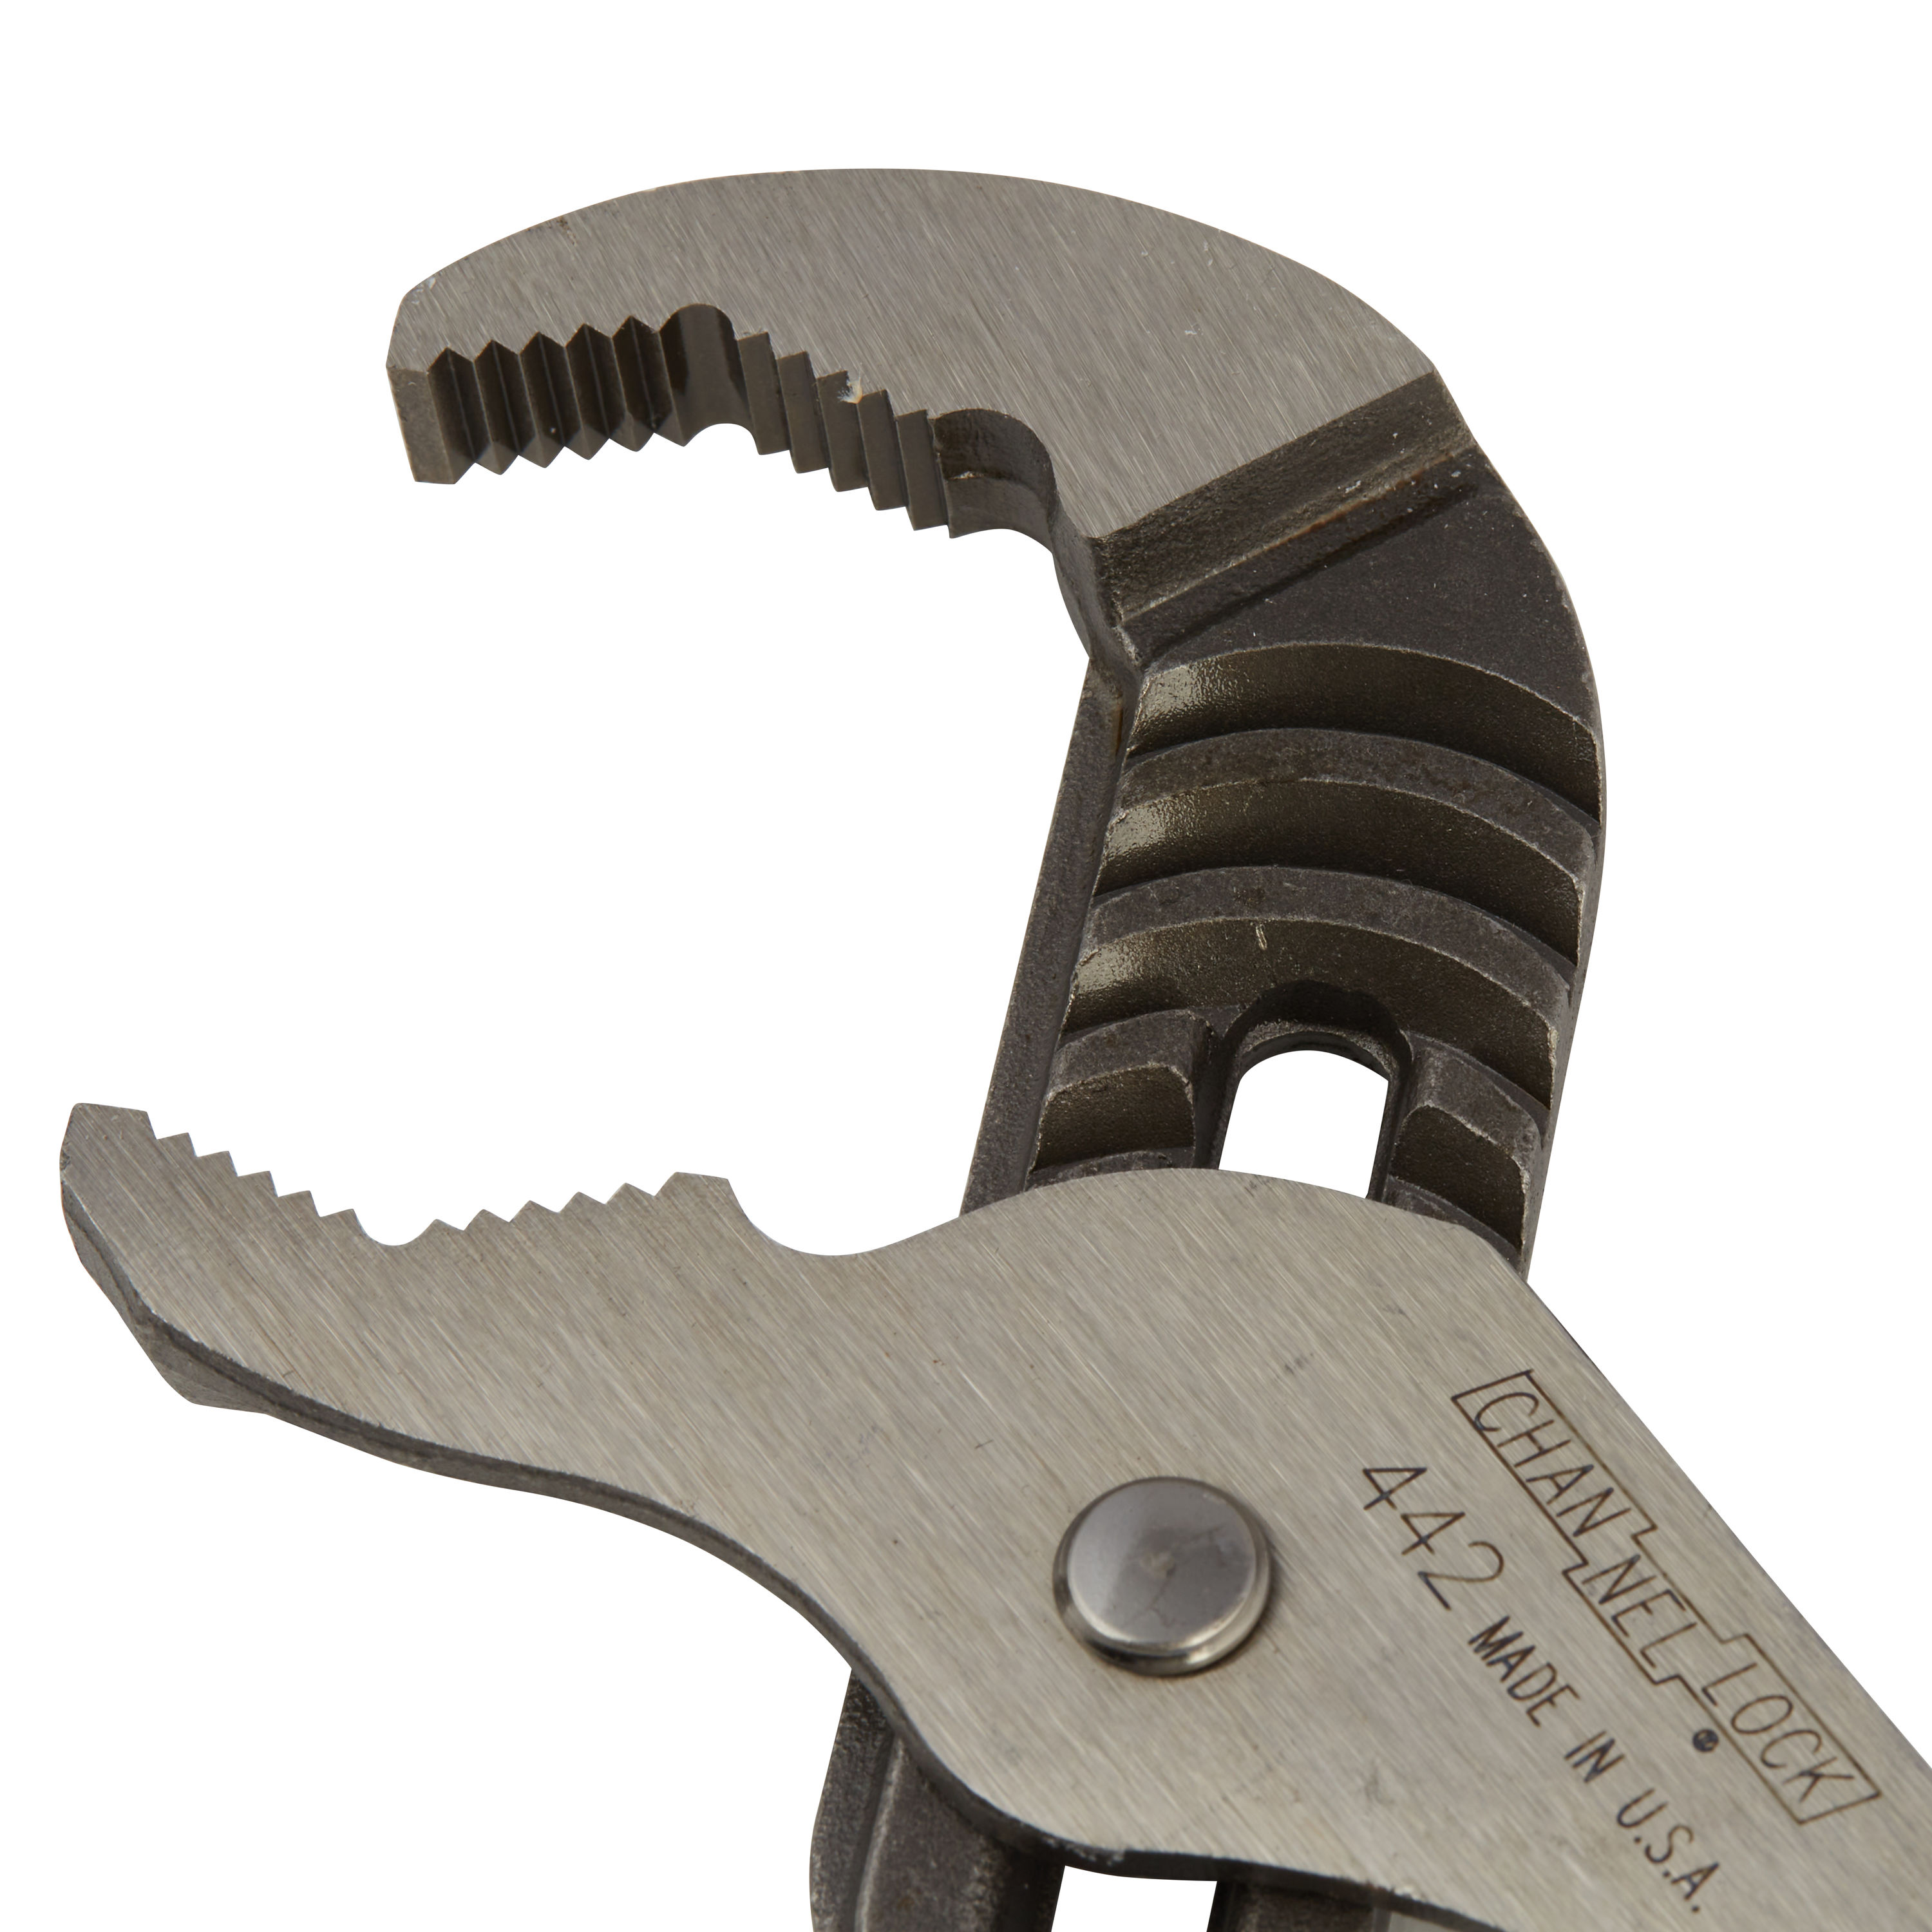 Channellock 12 in. V-Jaw Tongue and Groove Pliers 442 - The Home Depot